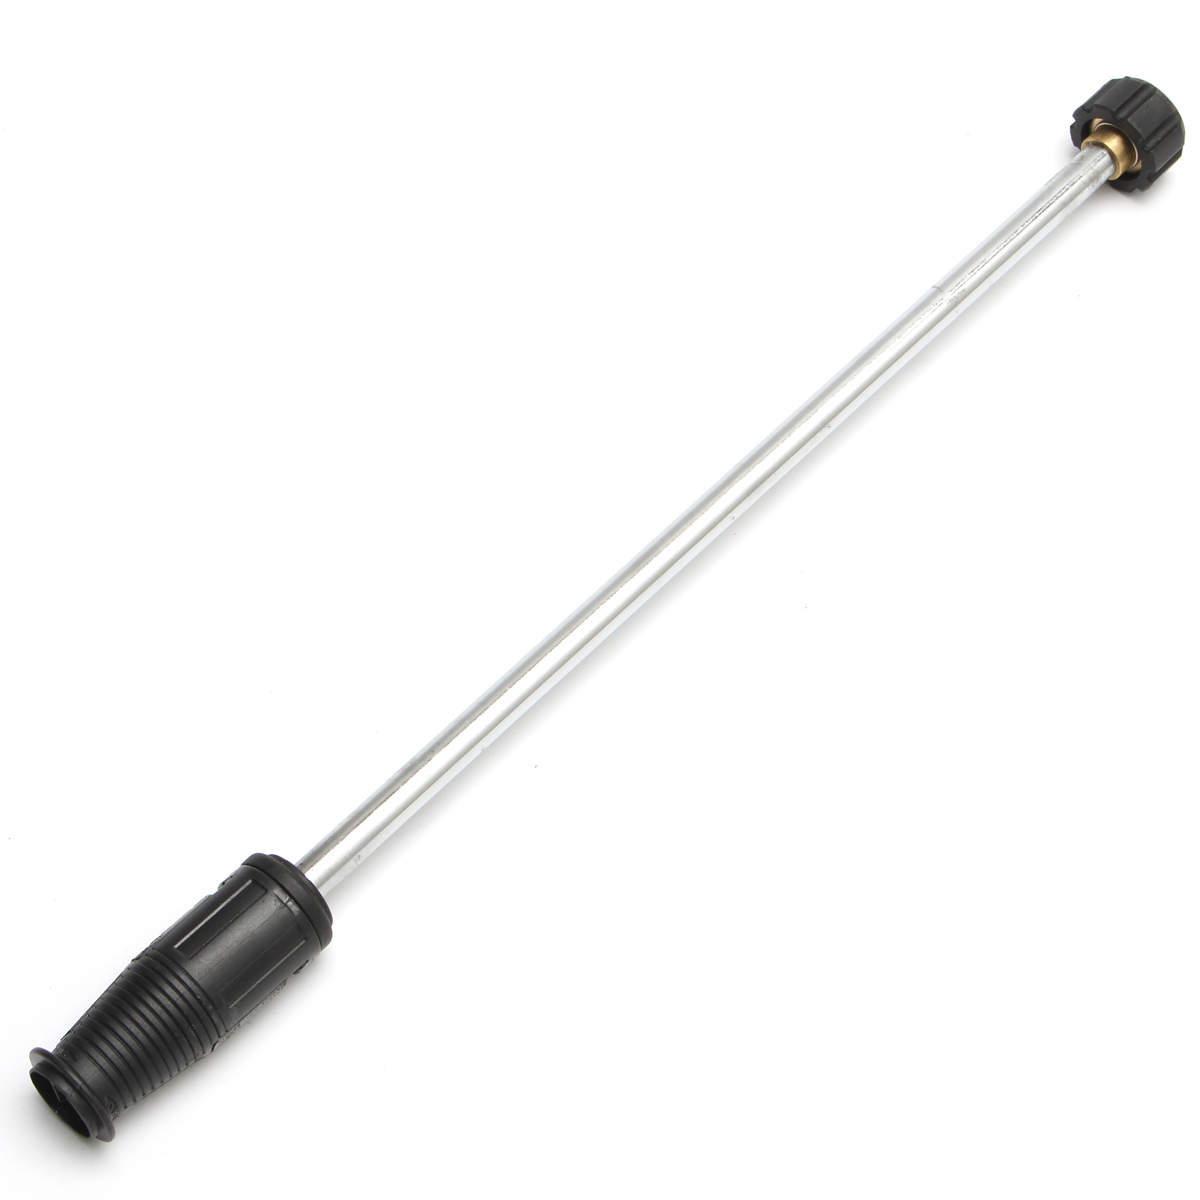 

M22 to 1/4 Inch Quick Release Extension Rod for 3000PSI Pressure Washer Spray Lance Gun